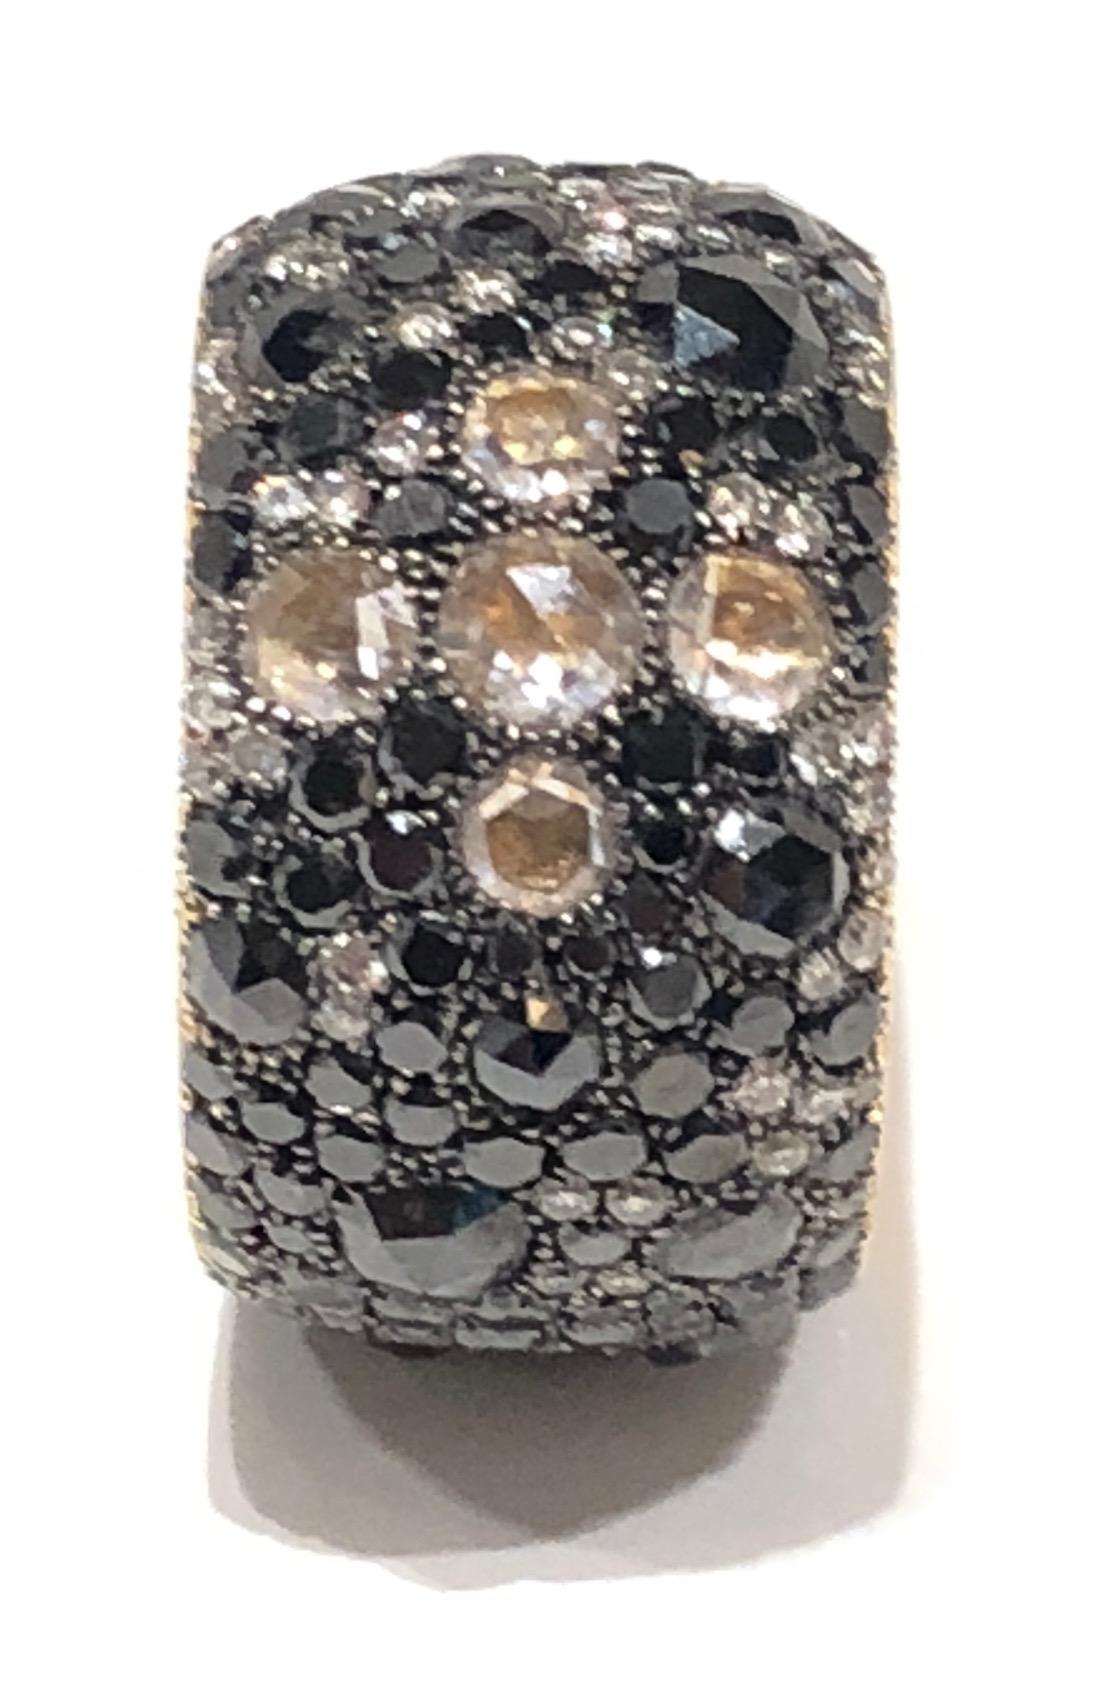 Unisex 18k yellow gold caviar set band Ring. Medium size black and white pave diamonds with diamond cross 
Designed by Martyn Lawrence Bullard. Can be made in any size, cost varies depending on size. 
Lead time 4 weeks